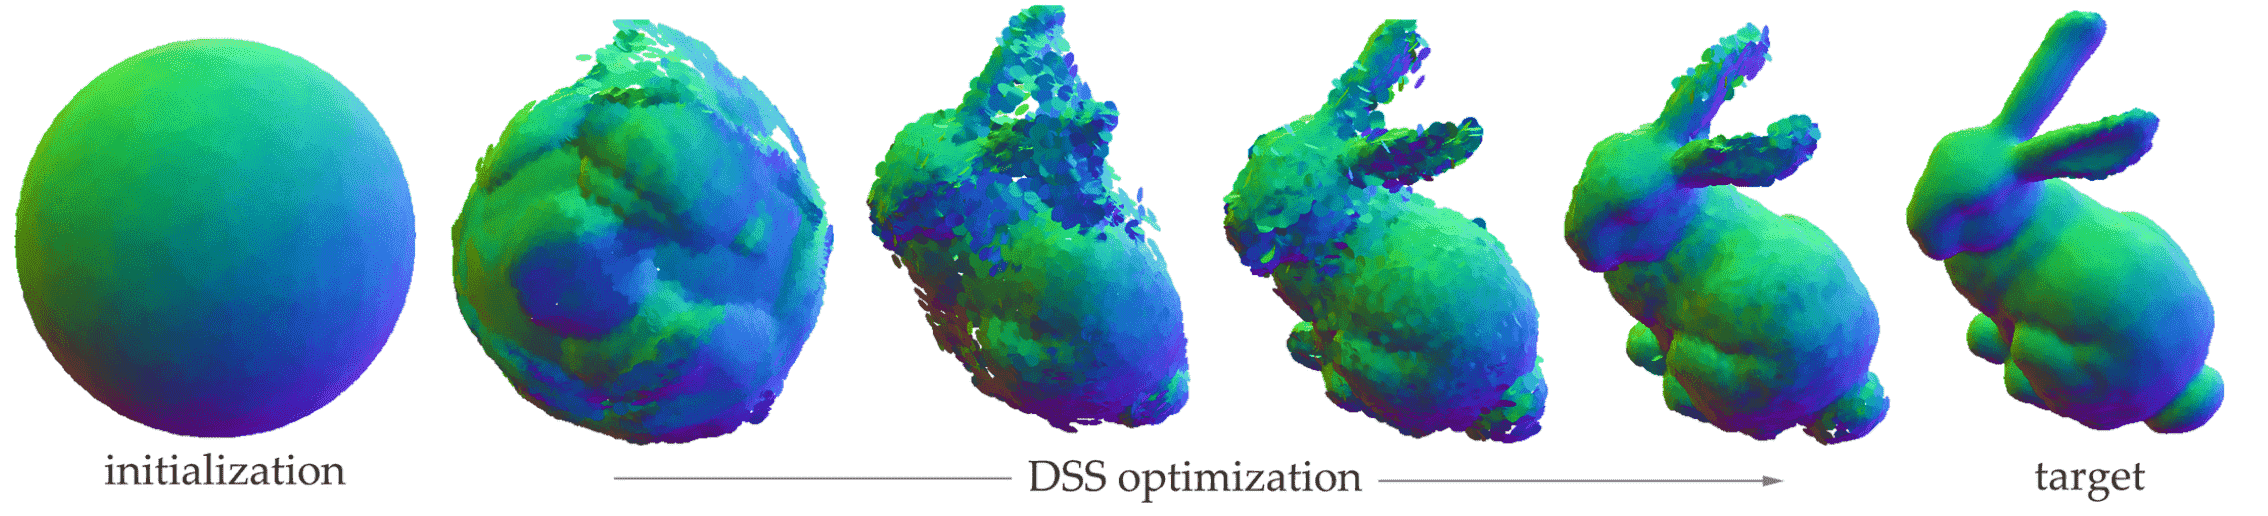 DSS successfully deforms a sphere to a target bunny model, capturing both large scale and fine-scale structure